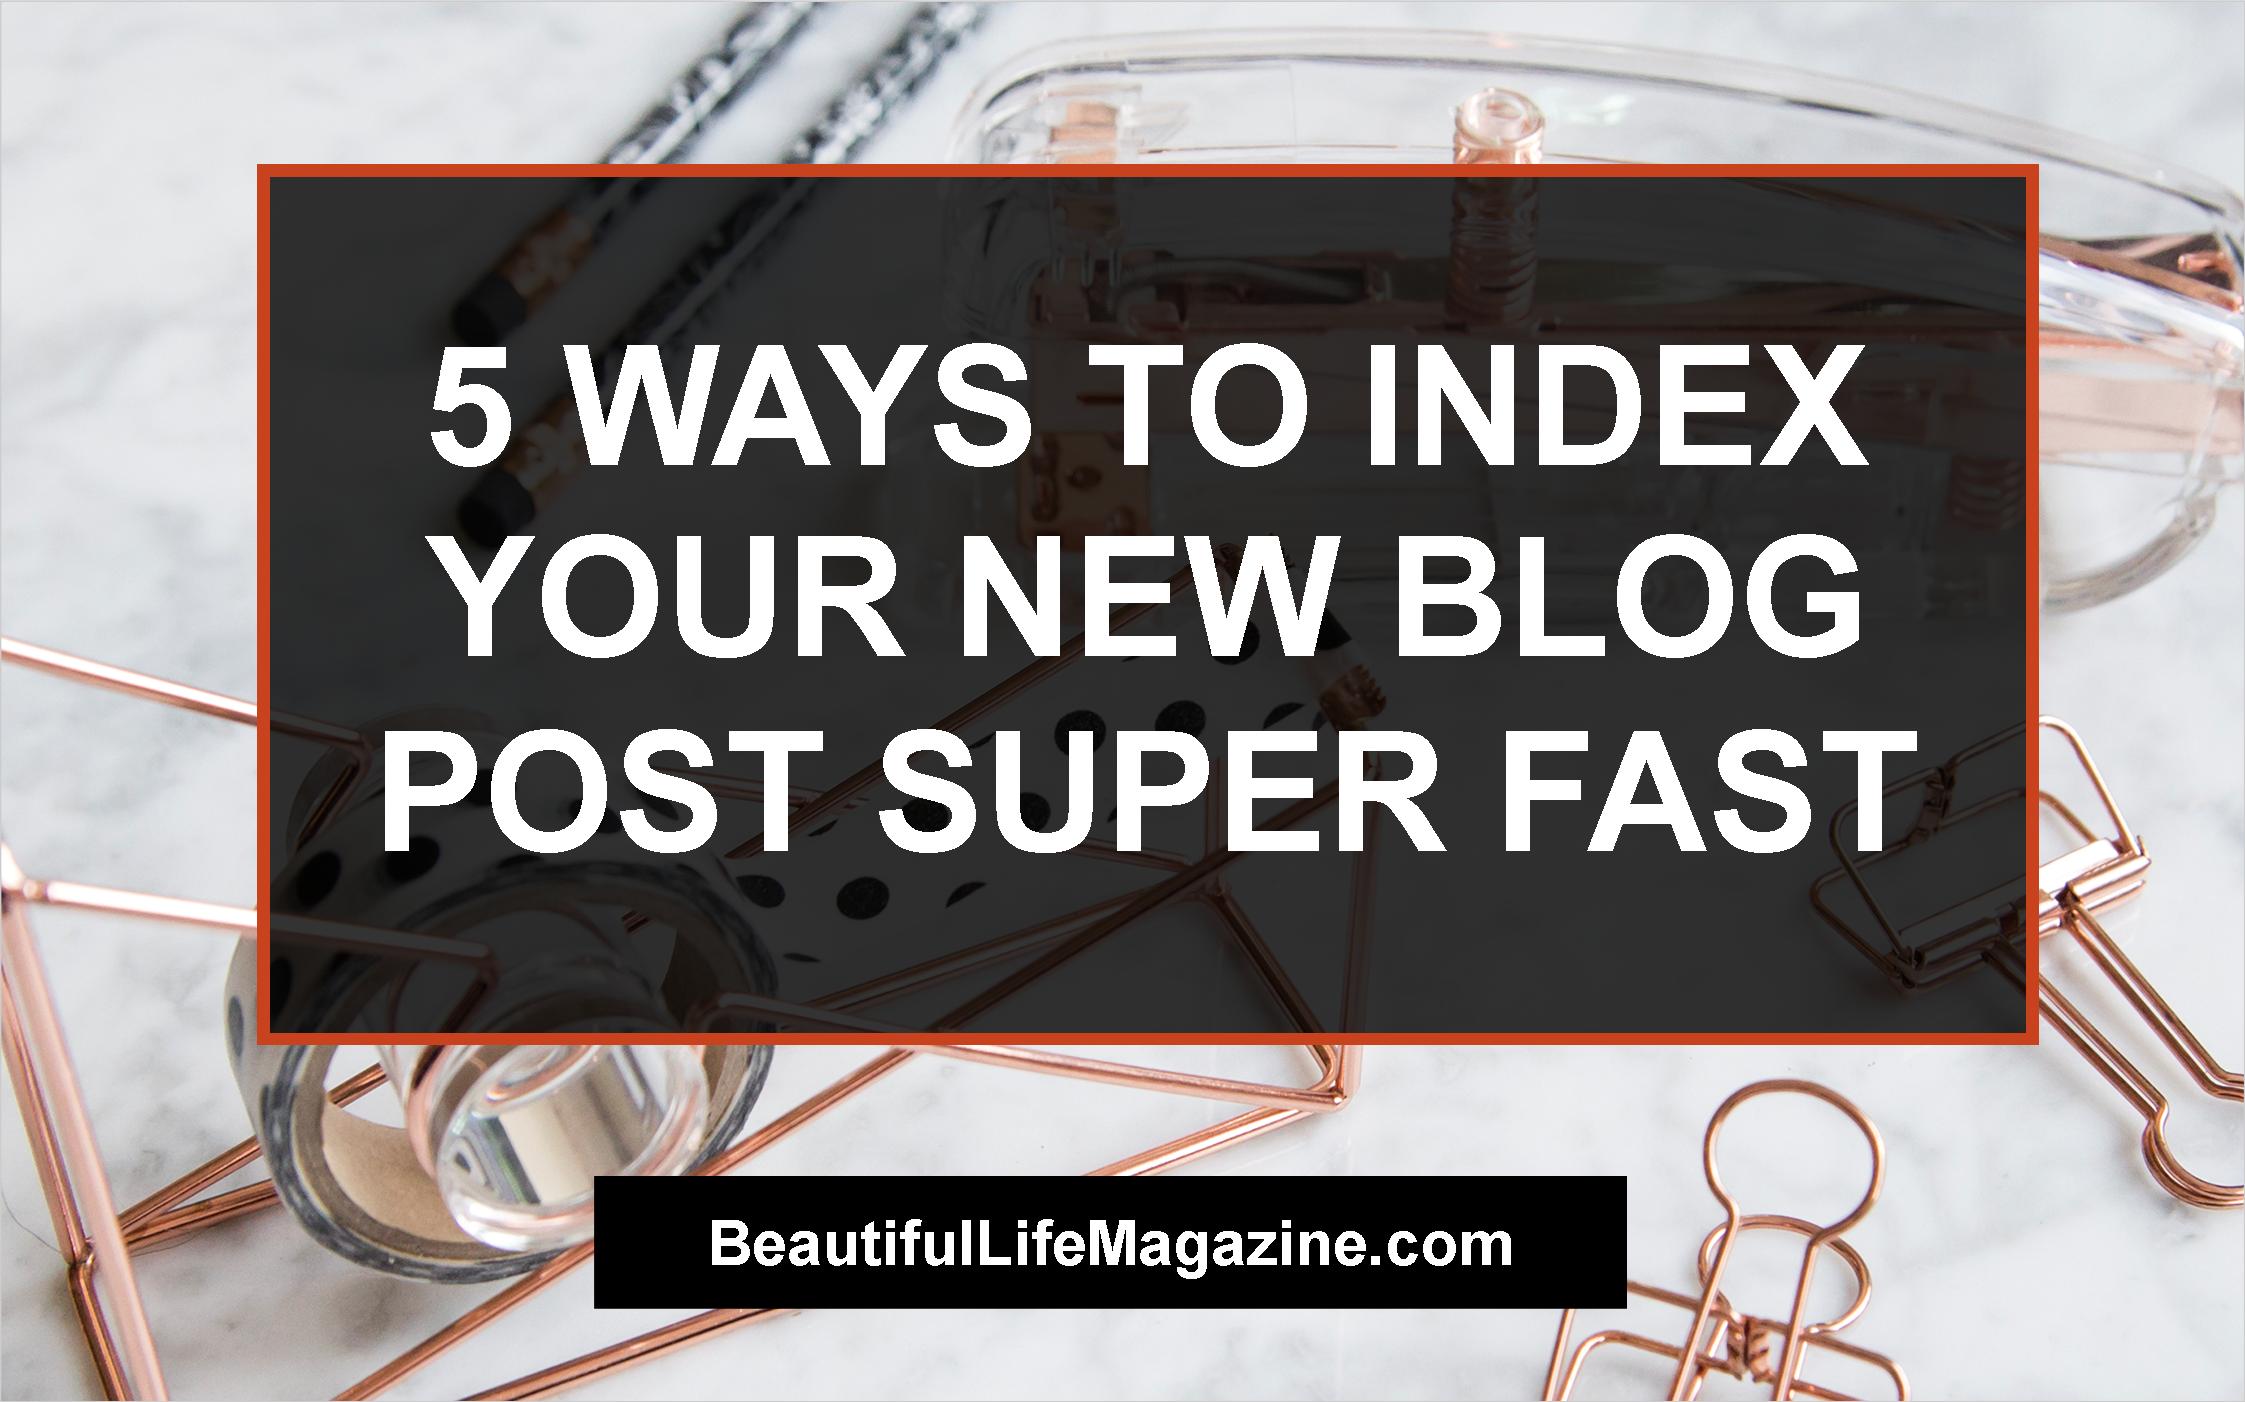 How to Get Index Your New Blog Post Fast? Here I write a detail post on getting your next blog post index super fast in Google or any search engine.